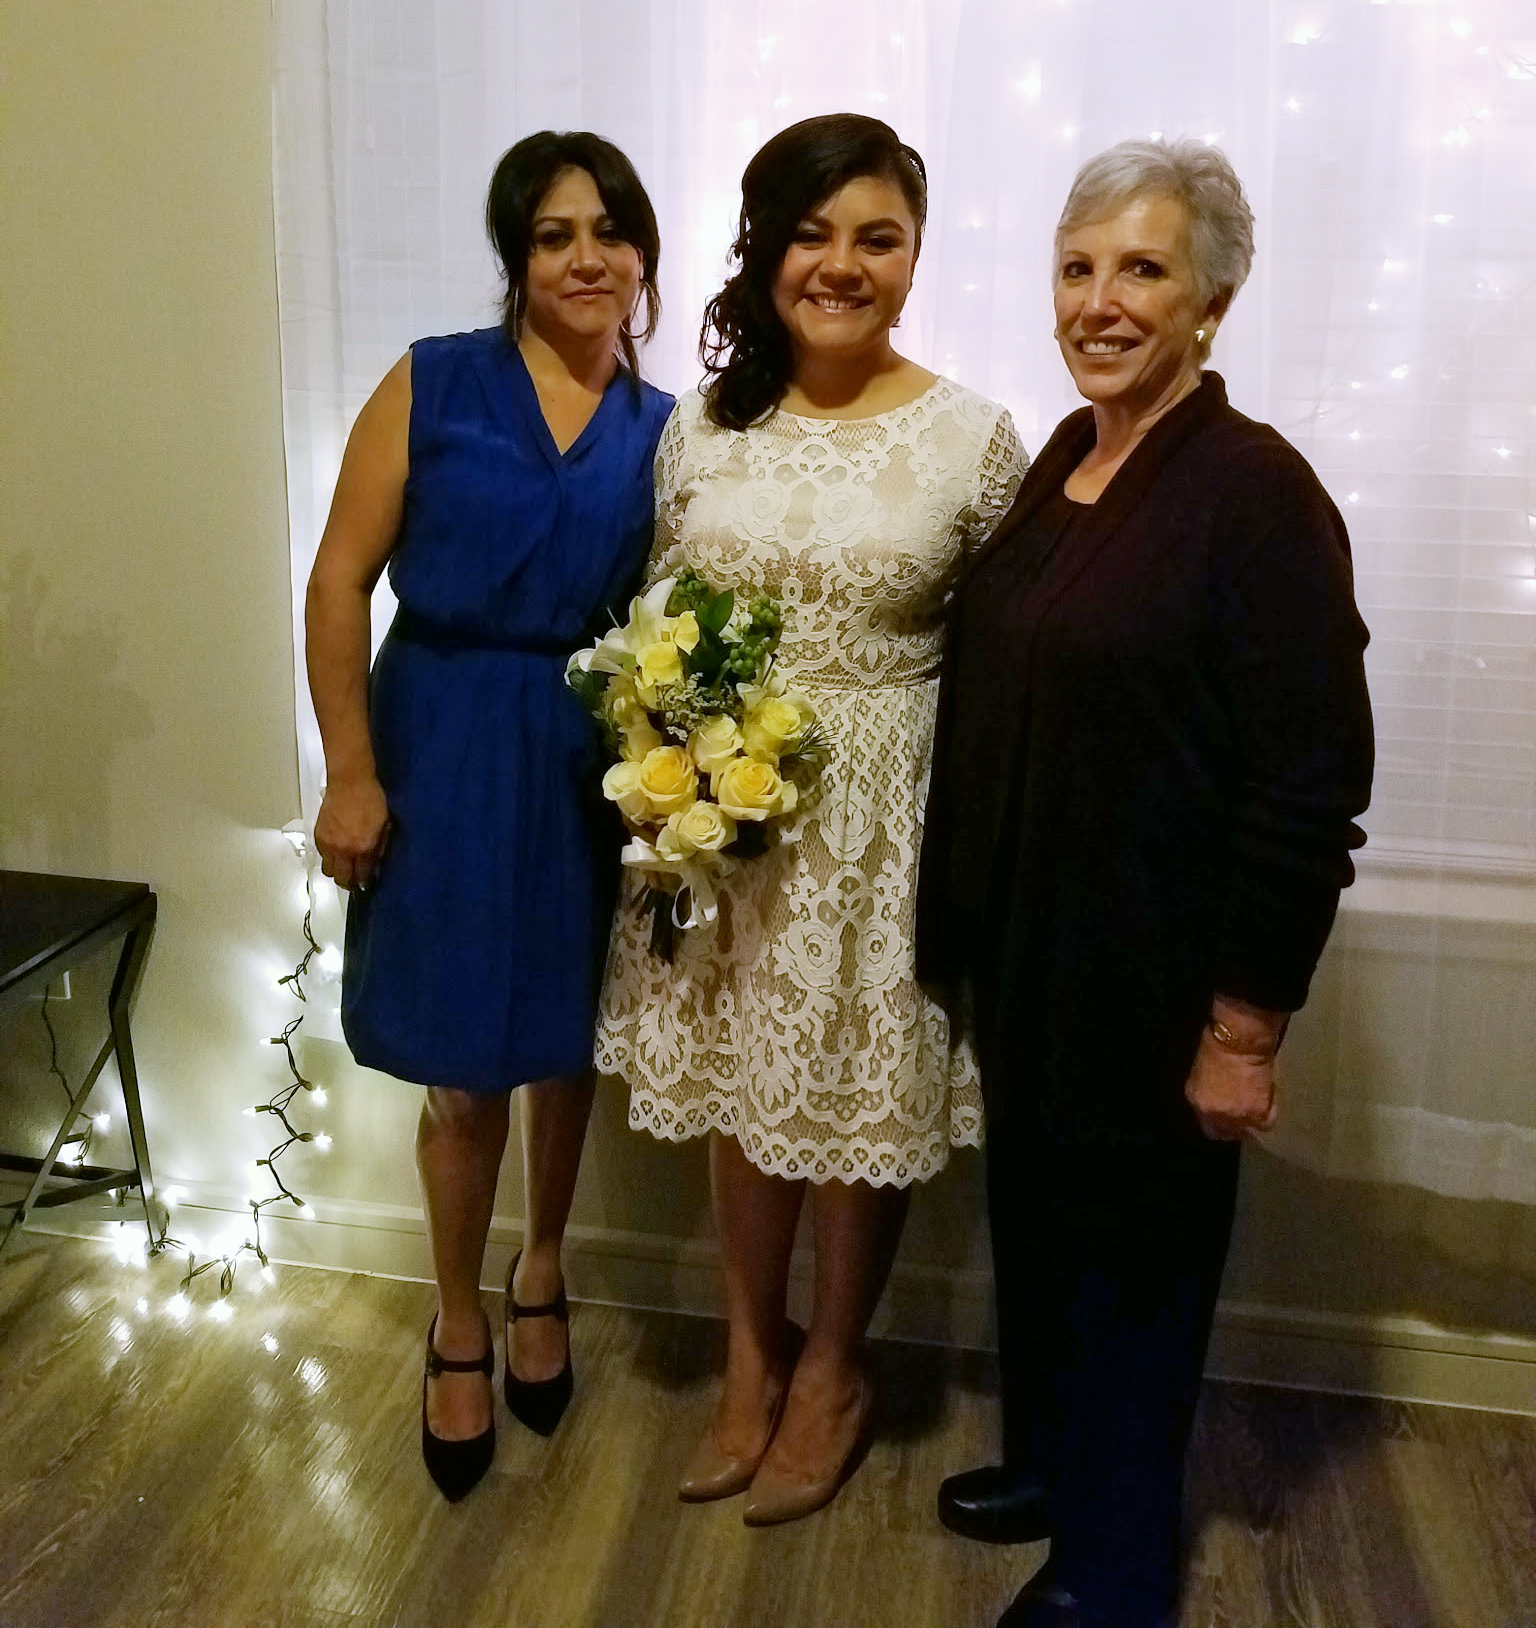 PHOTO: Bride-to-be Myrna Orozco of Katy, Texas is pictured here with her moms.